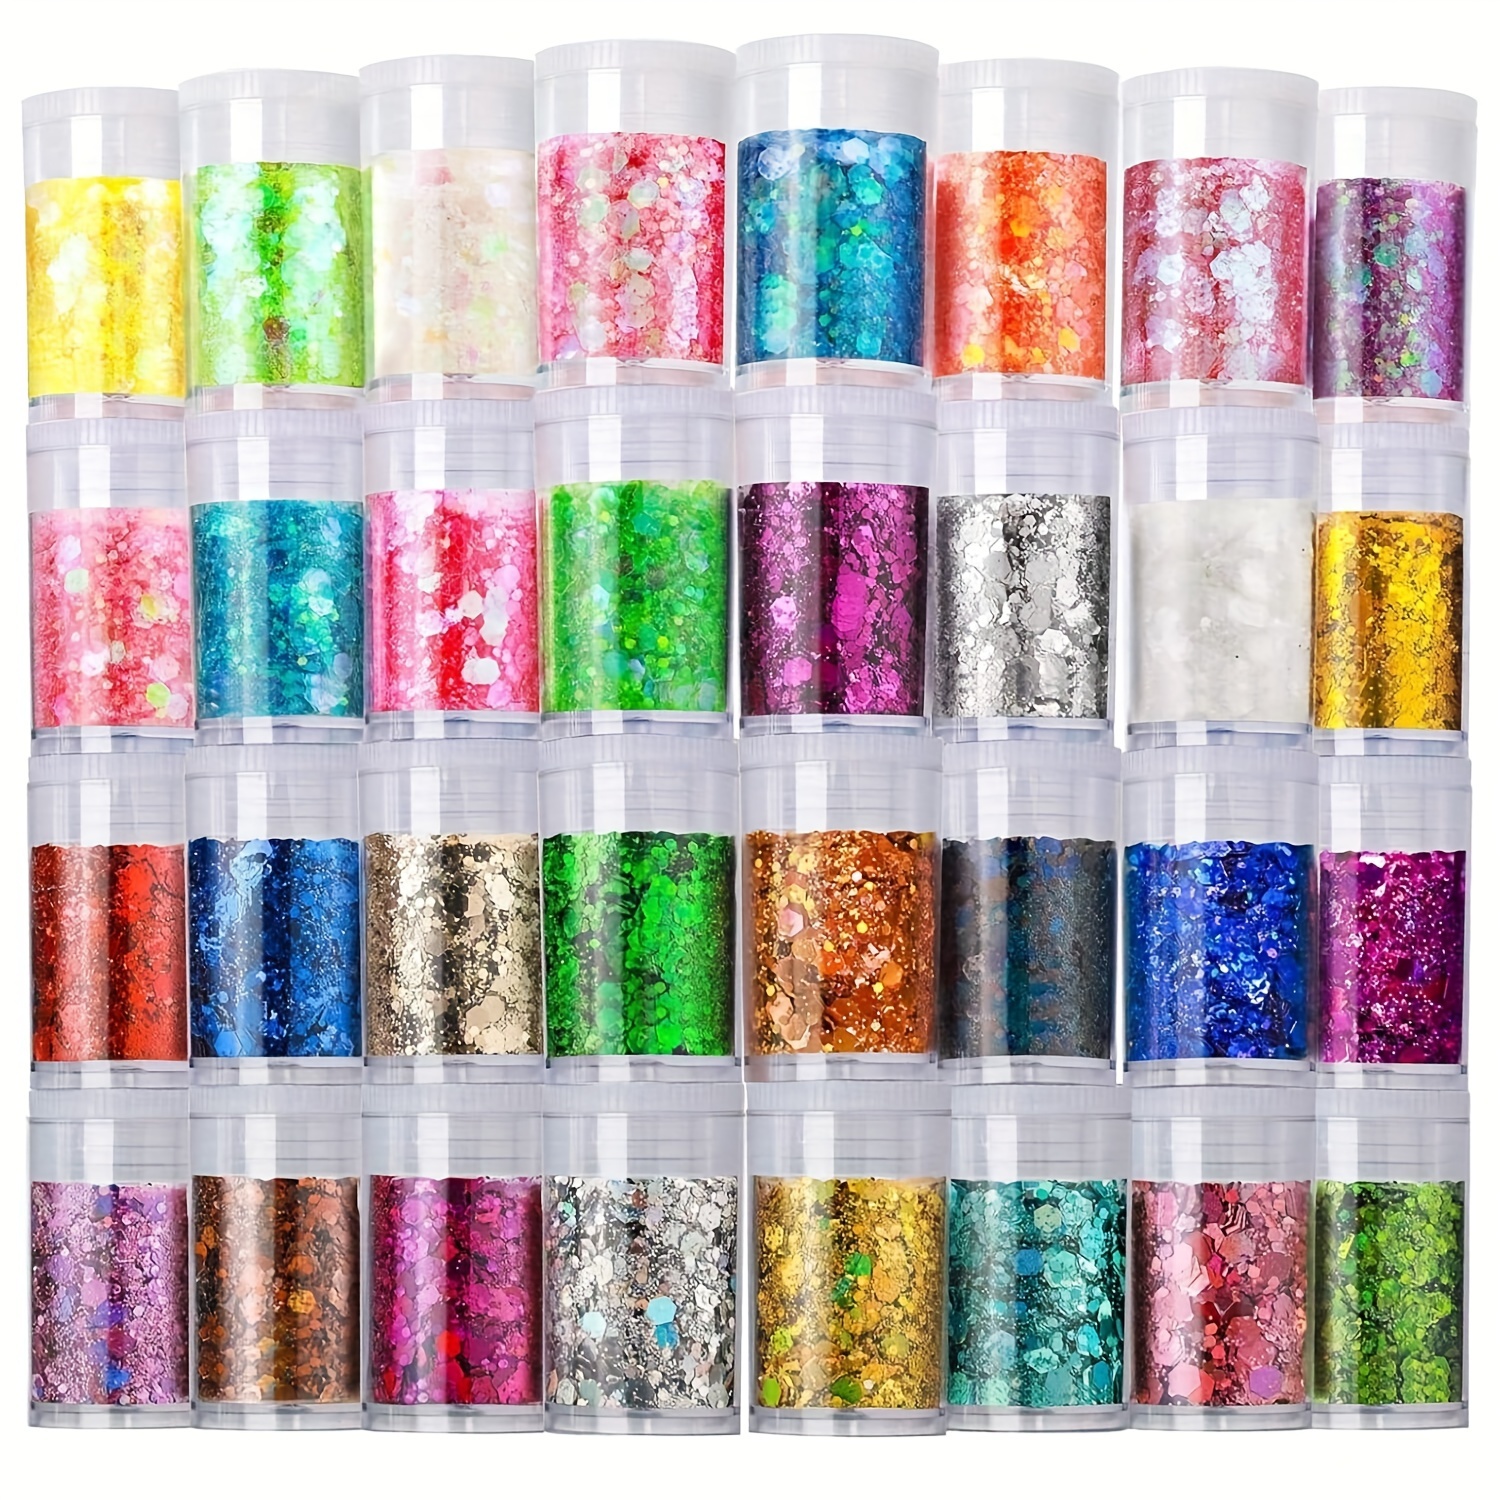 Holographic Periwinkle Glitter and Sequins Glitter and Sequins Mix Craft  Glitter Nail Glitters Resin Glitter Nail Art Supplies 